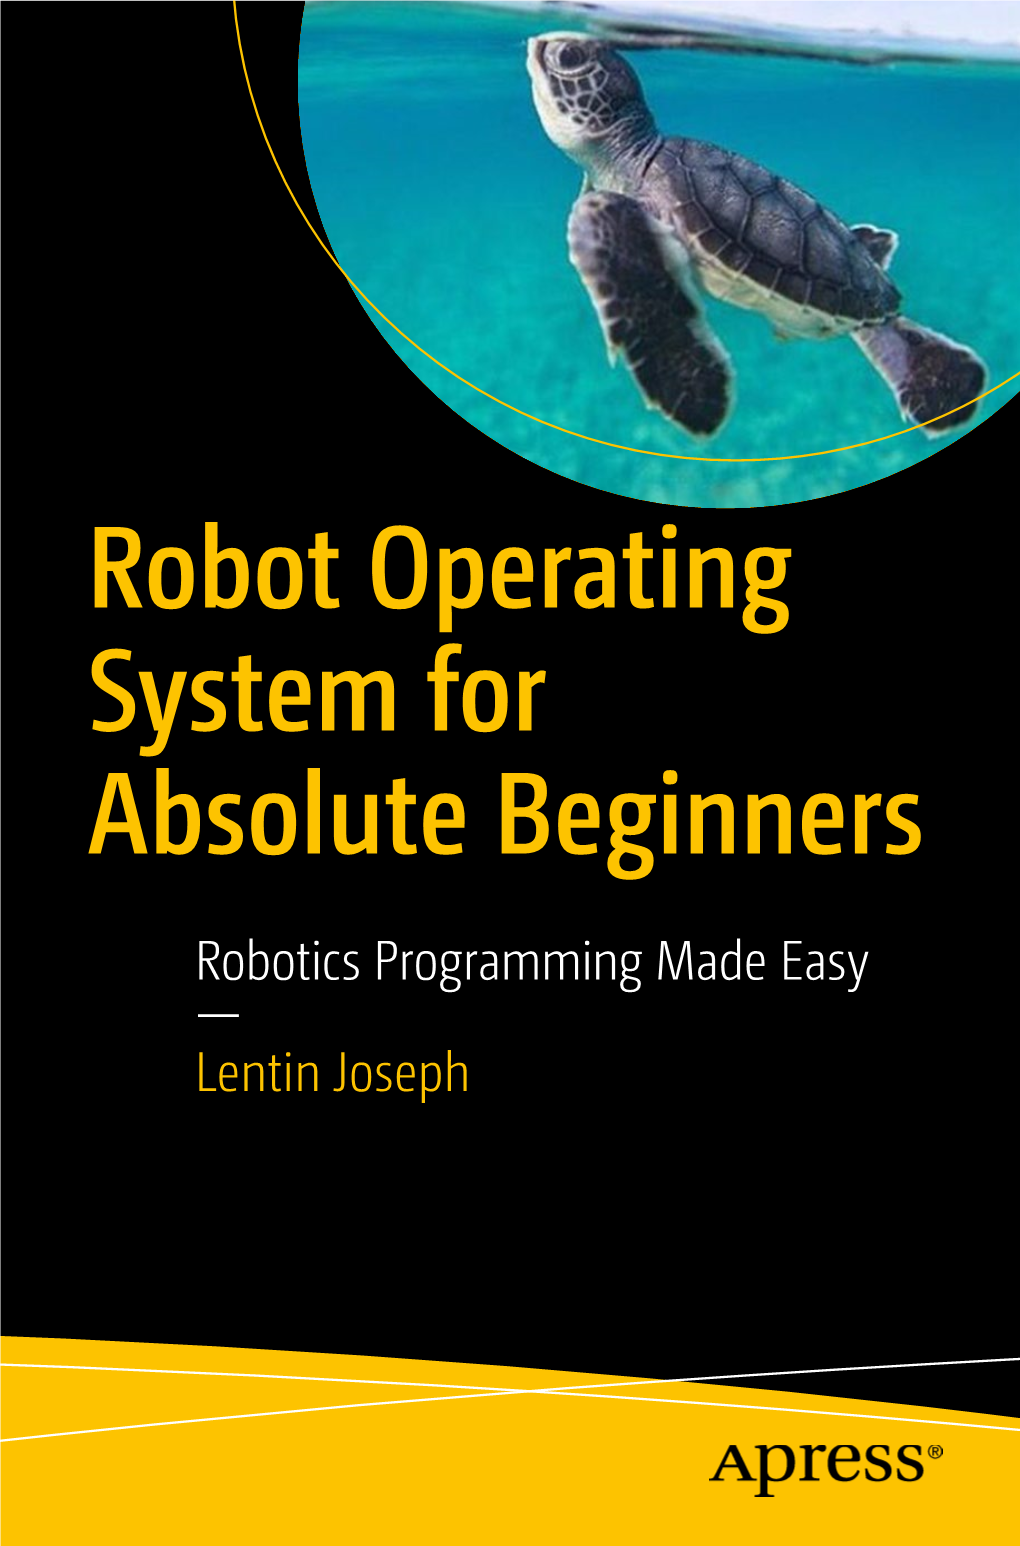 Robot Operating System for Absolute Beginners